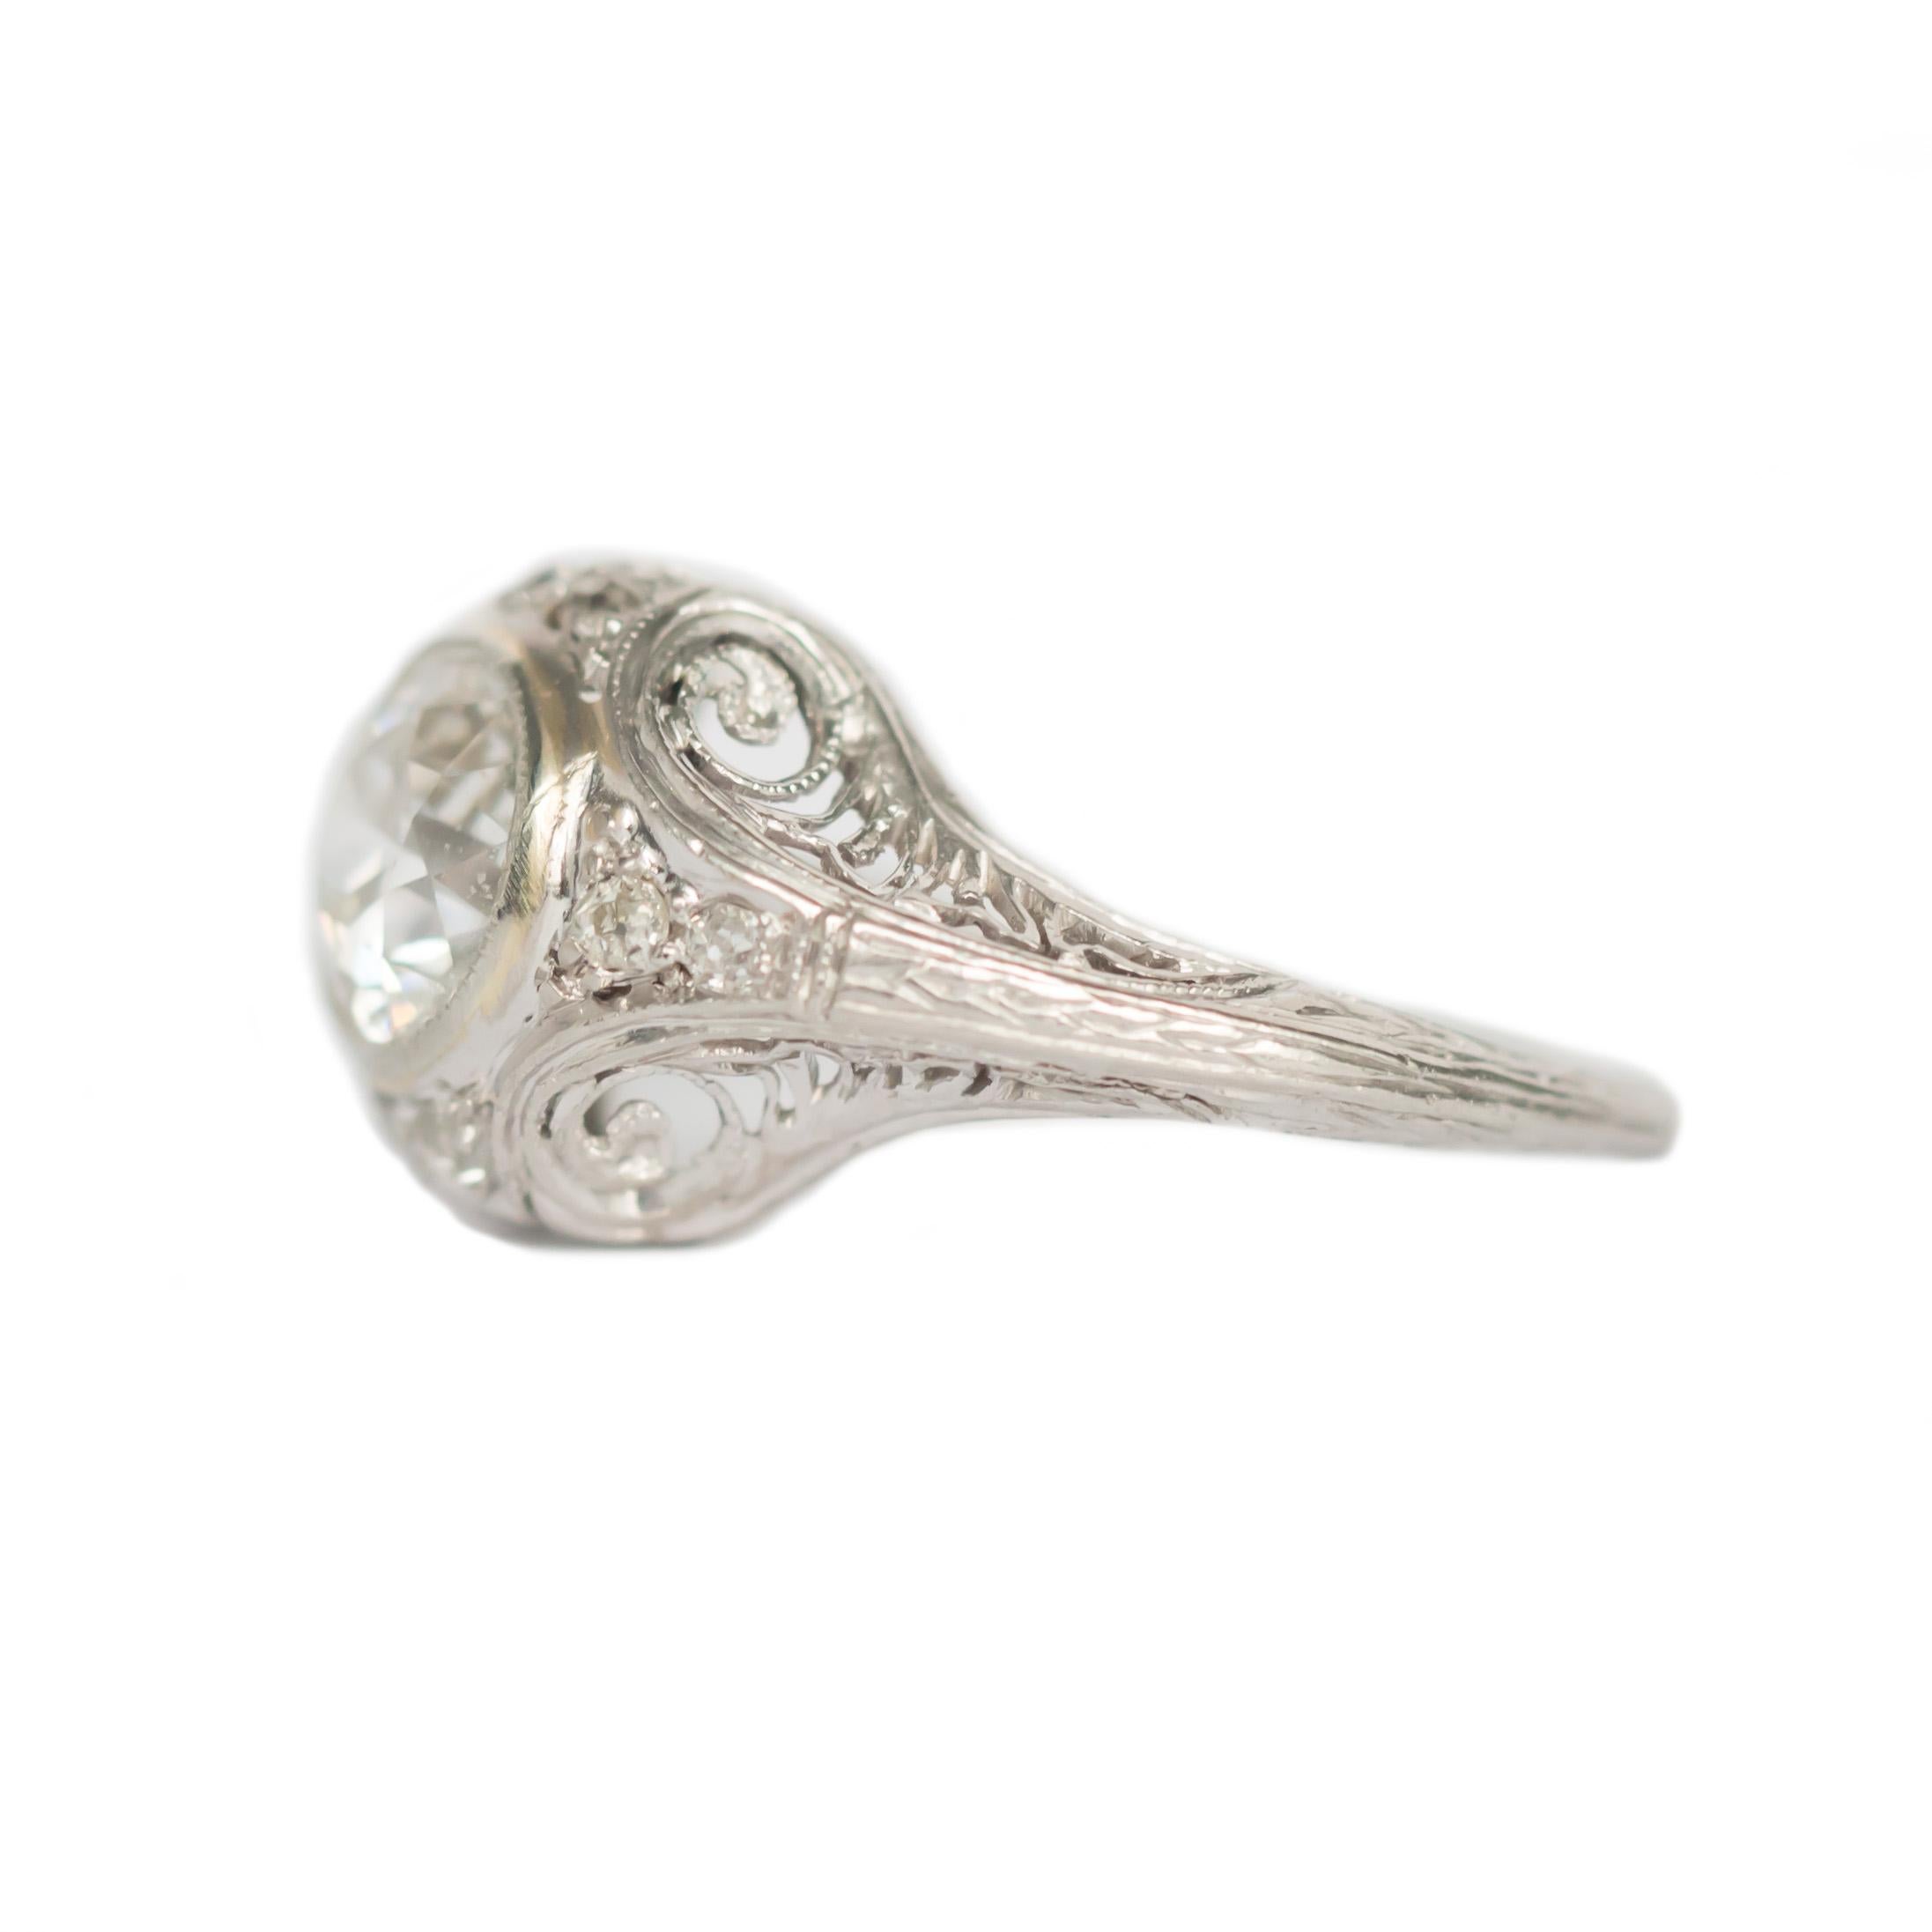 Ring Size: 5
Metal Type: Platinum
Weight: 3.6 grams

Center Diamond Details
Shape: Old European Brilliant 
Carat Weight: 1.03 carat
Color: J
Clarity: I1

Side Stone Details: 
Shape: Antique European Cut 
Total Carat Weight: .15 carat, total